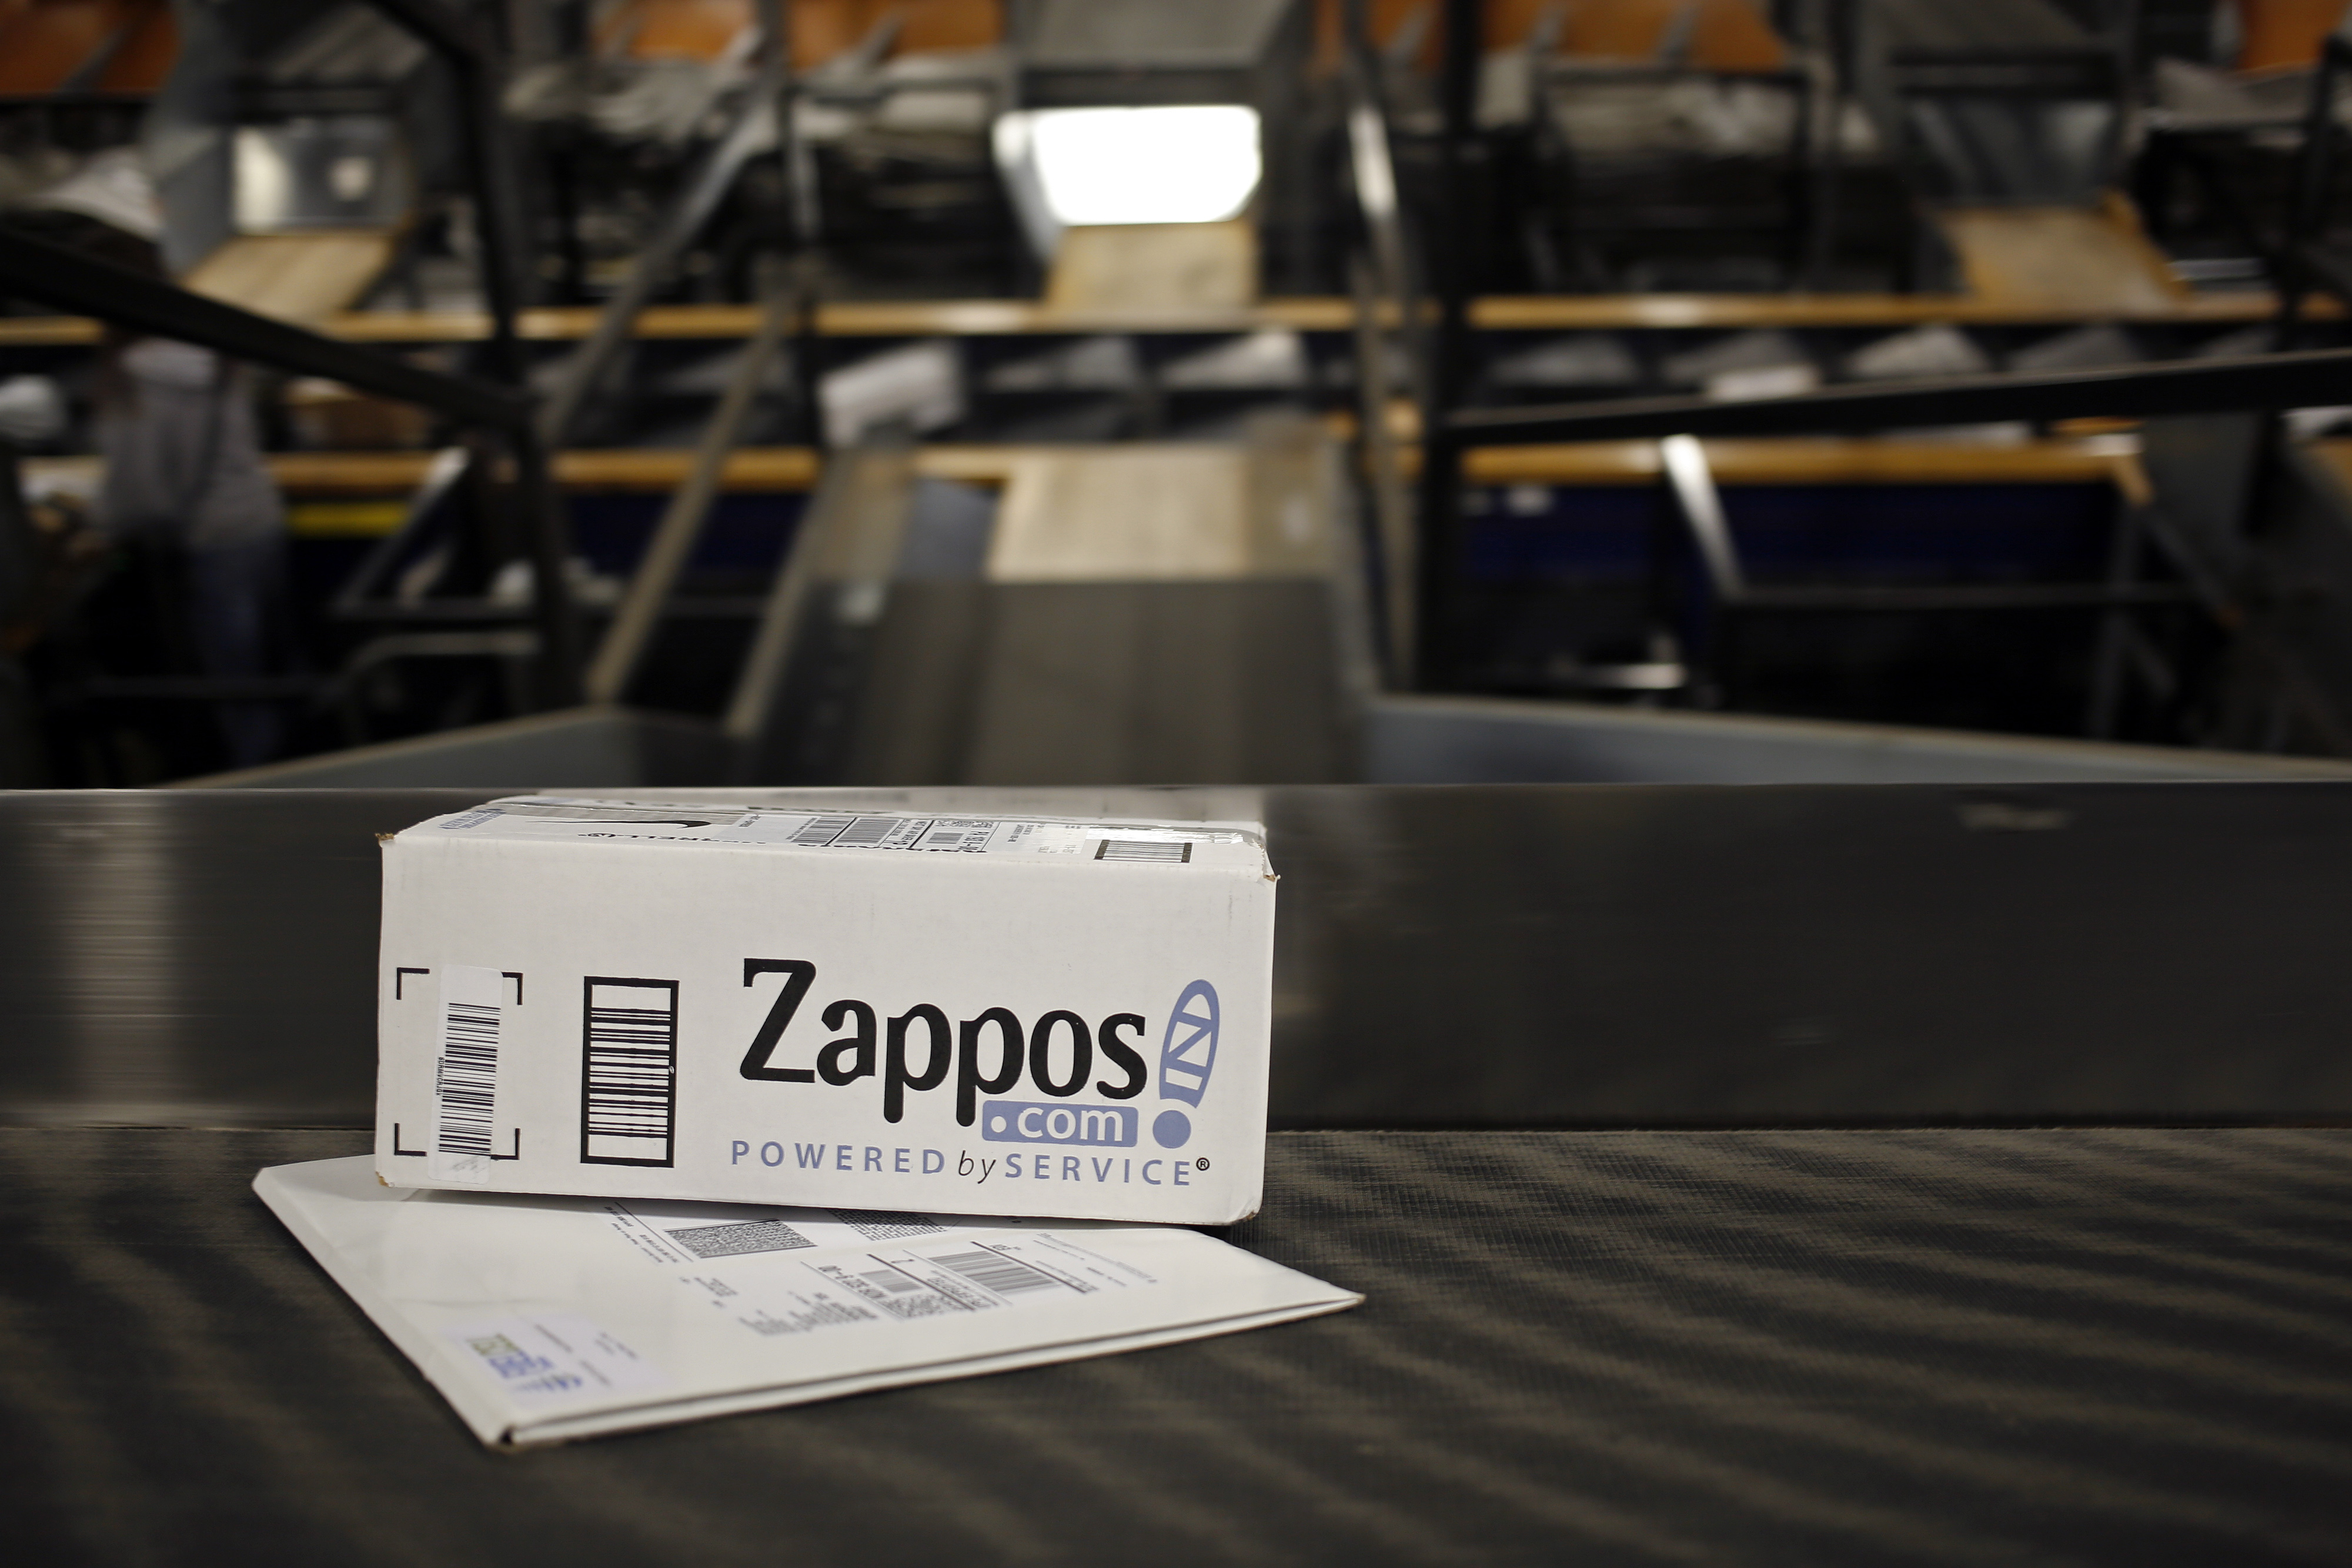 A package from Zappos.com moves down a conveyor belt during the afternoon sort at the United Parcel Service Inc. (UPS) Worldport facility in Louisville, Kentucky, U.S., on Tuesday, April 21, 2015. (Bloomberg&mdash;Bloomberg via Getty Images)